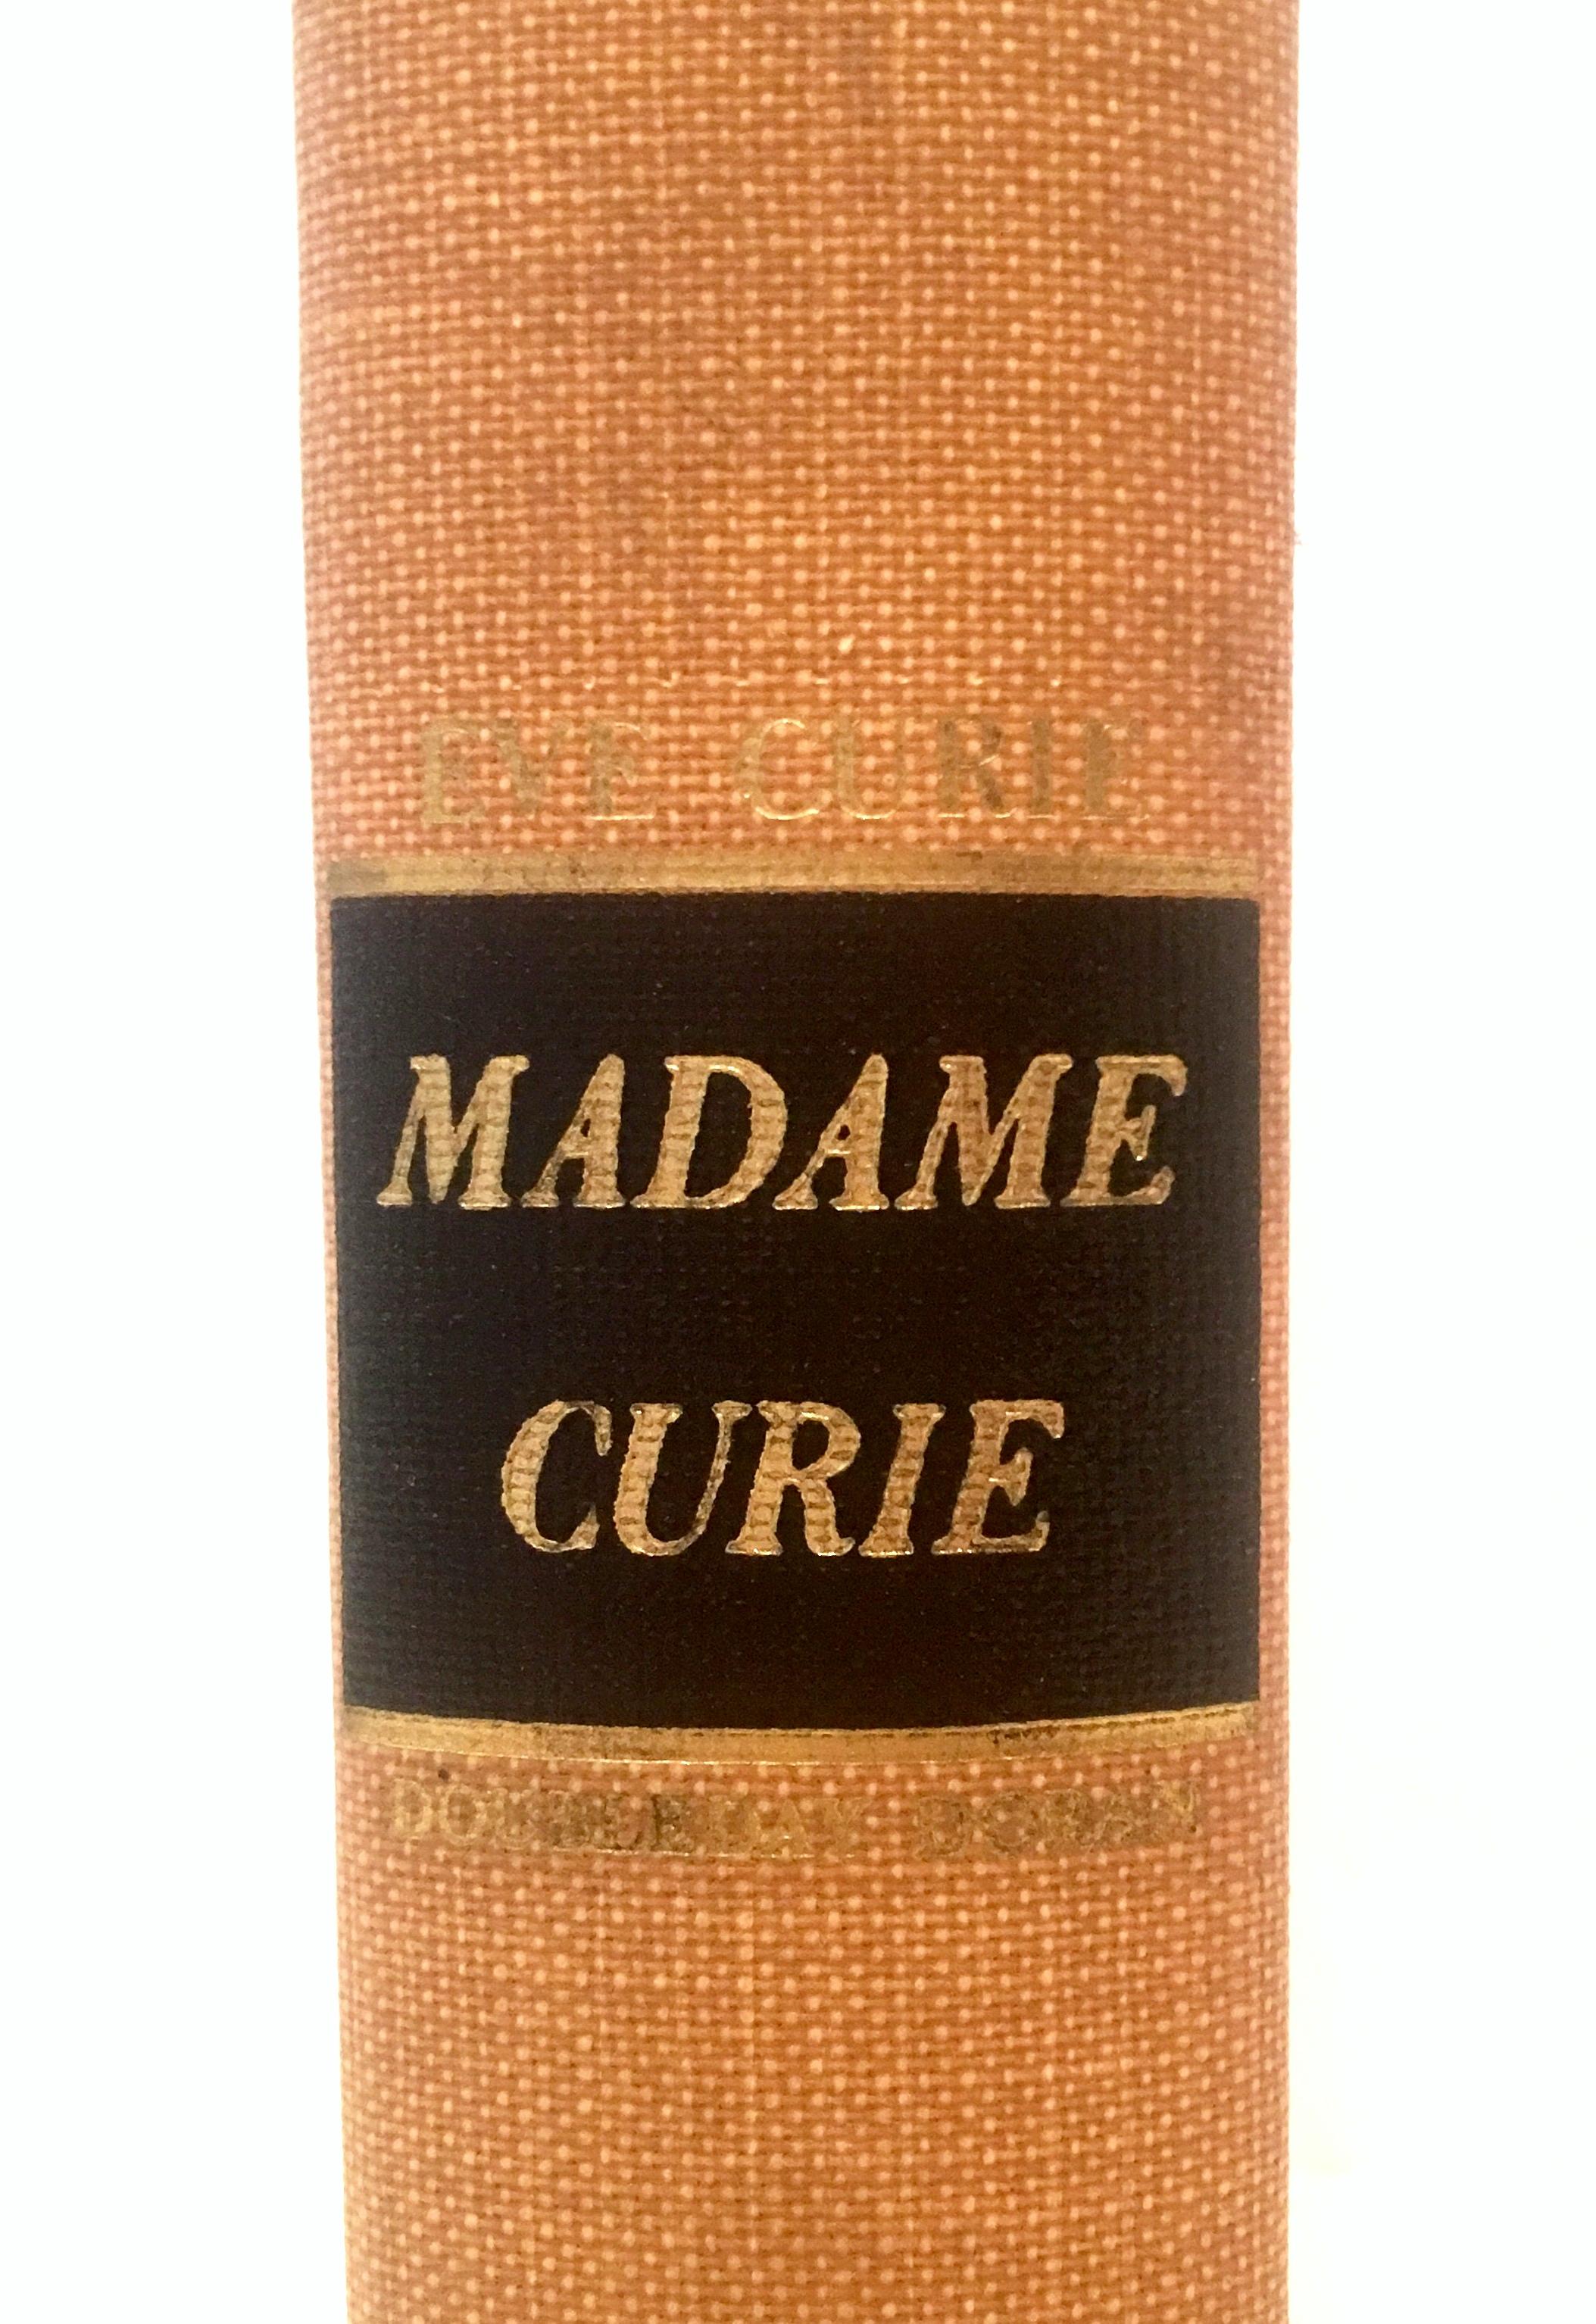 20th Century 1937 First Edition Book 